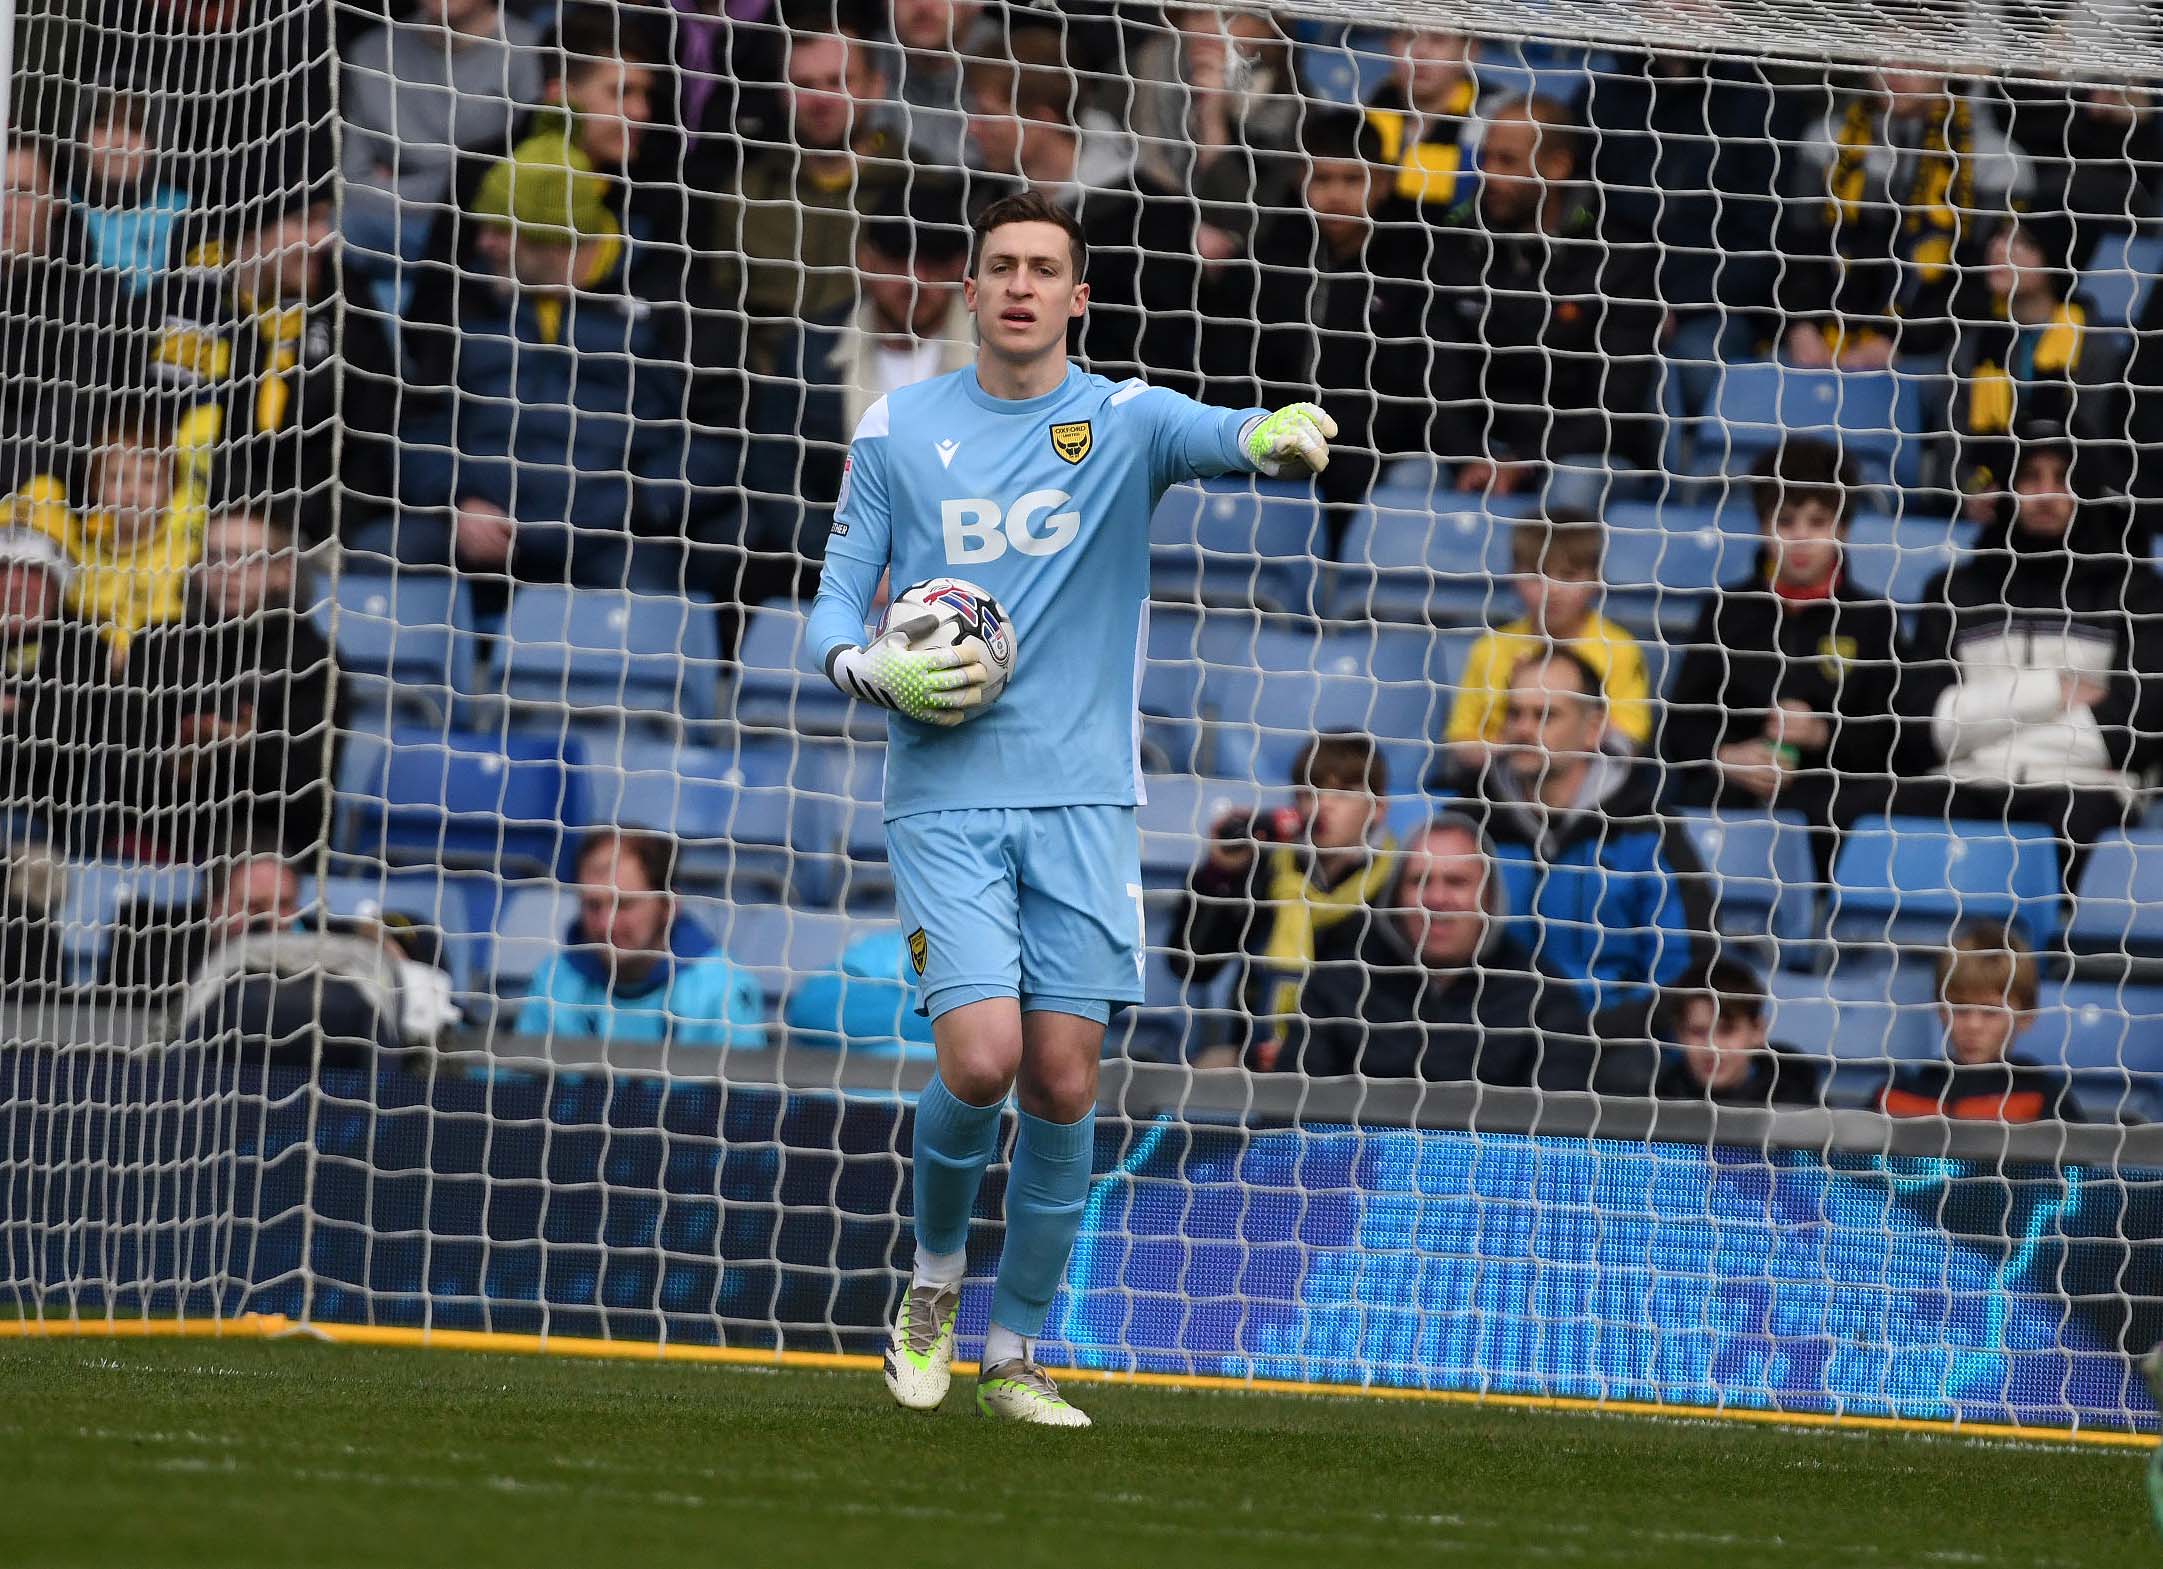 Oxford United goalkeeper Jamie Cumming on battle for number one jersey